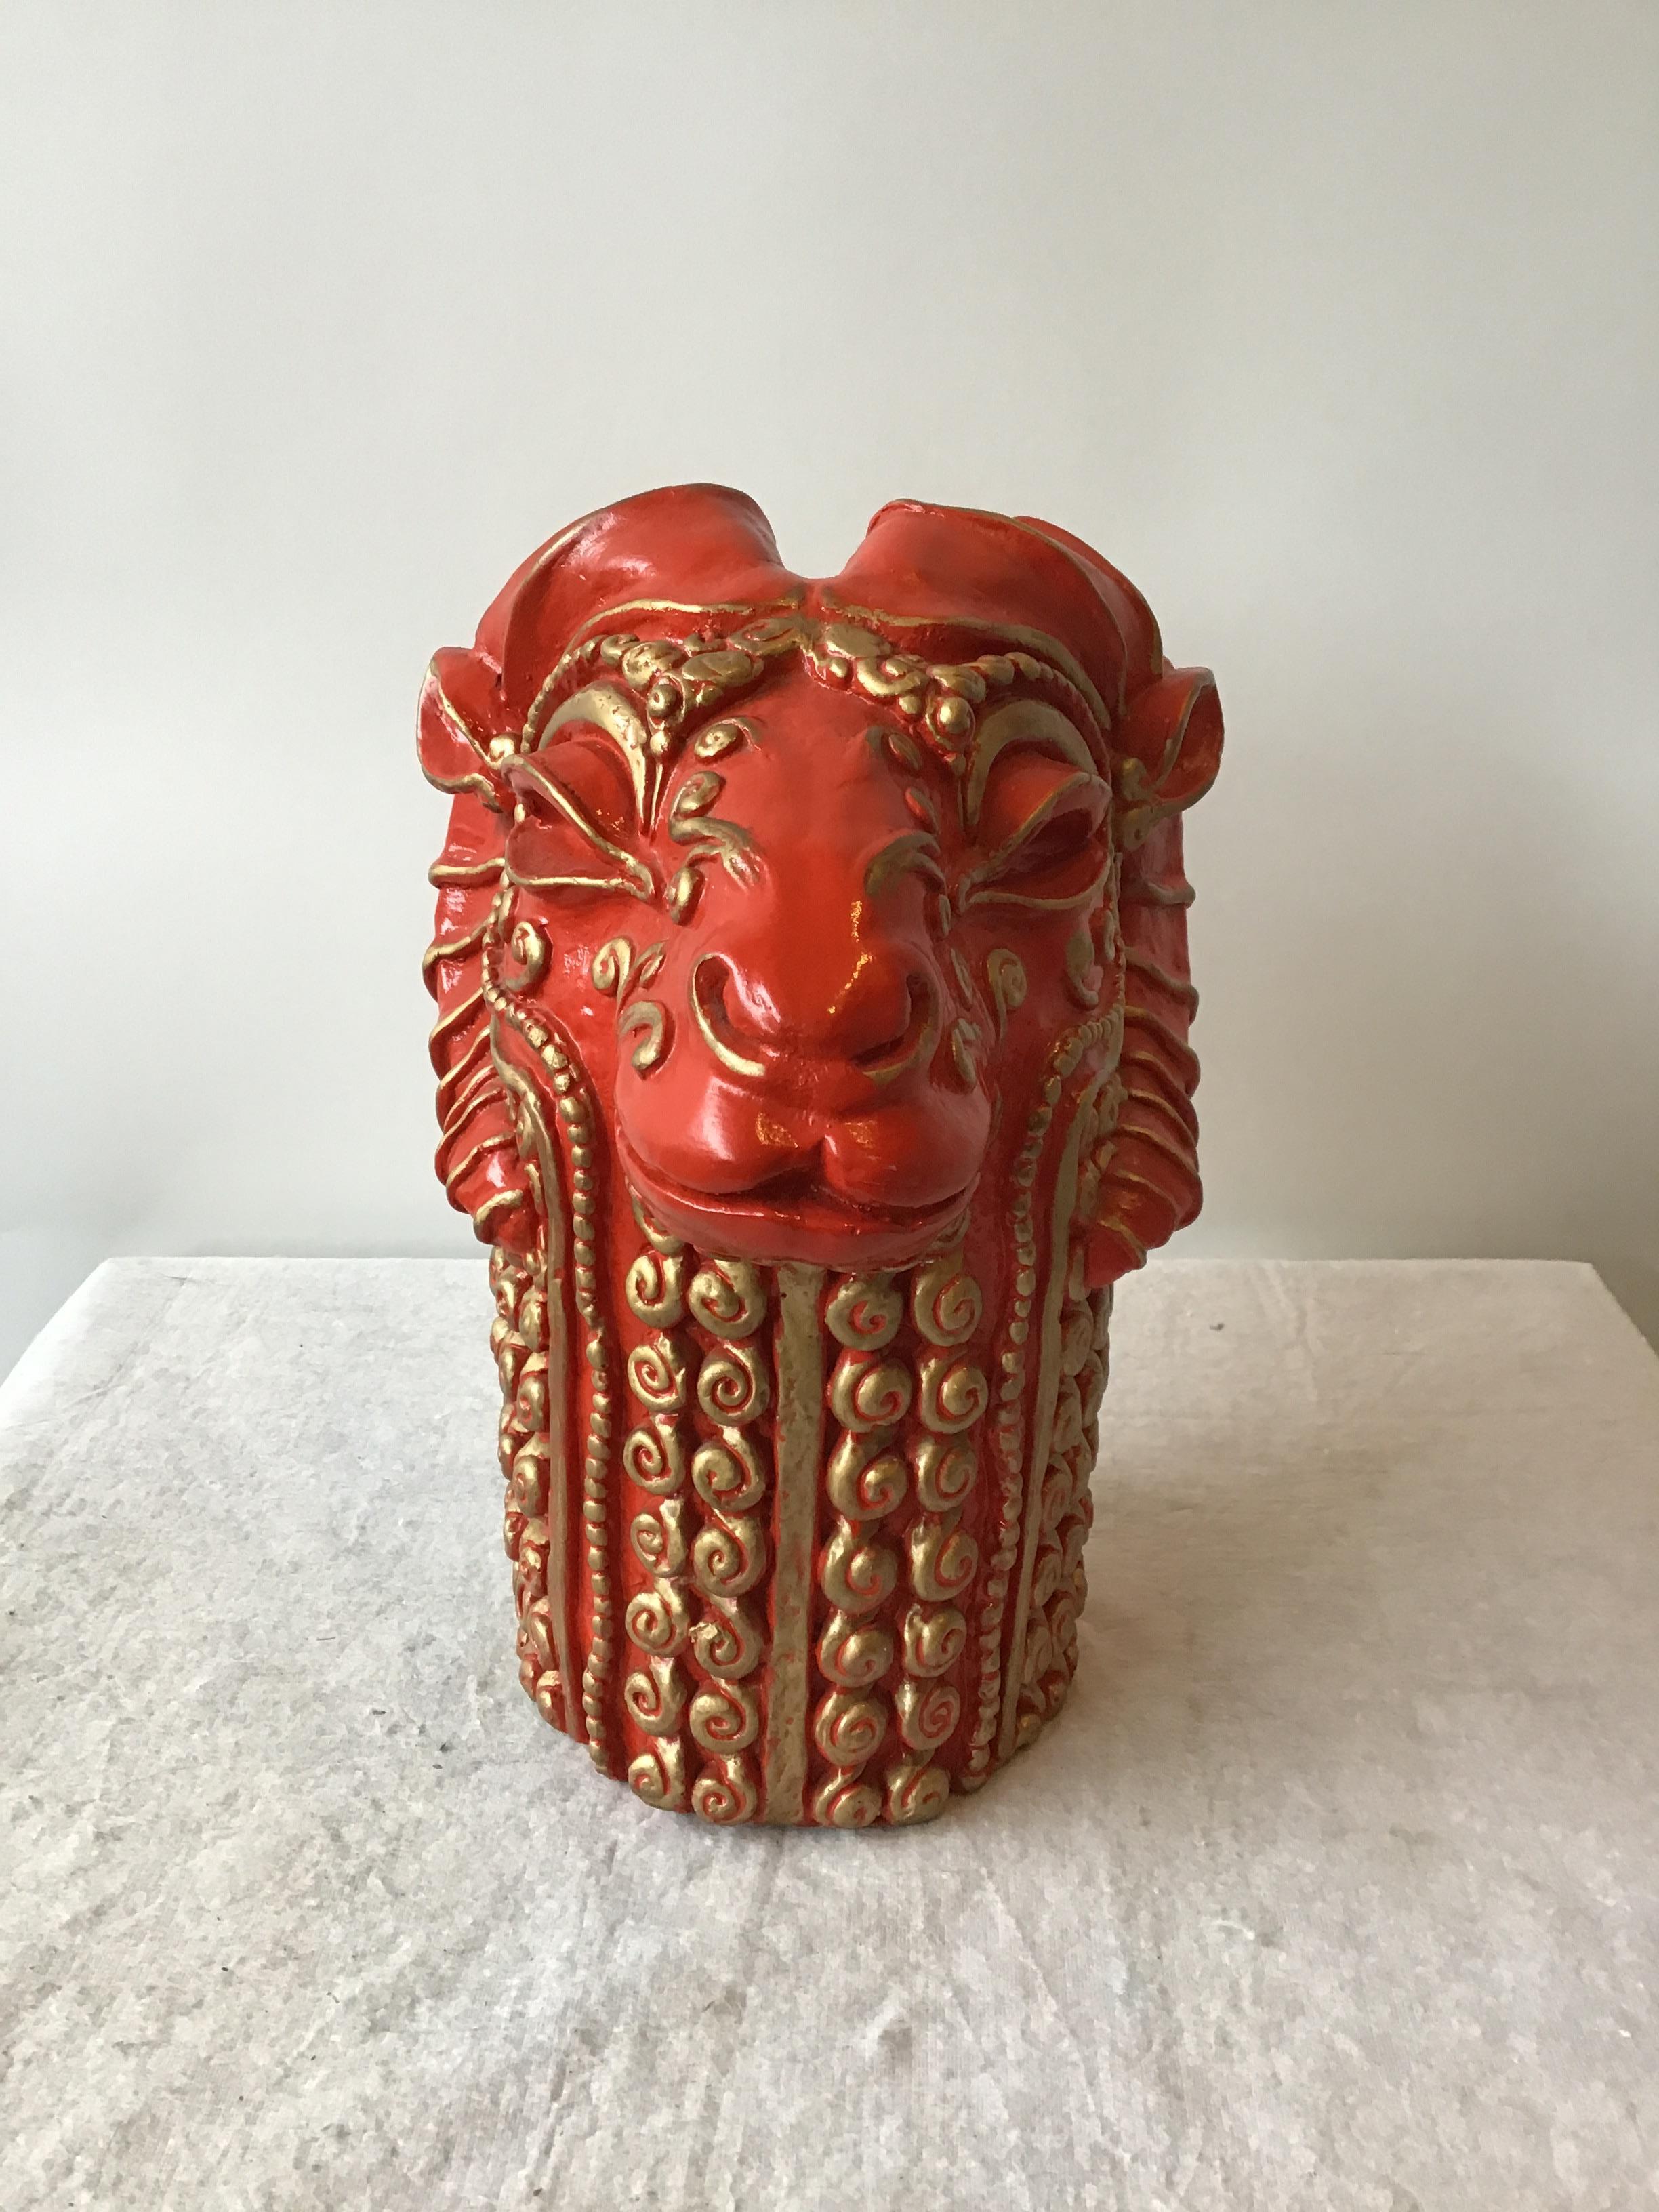 1970s plaster ram head sculpture from the Dolby estate in East Hampton, NY.